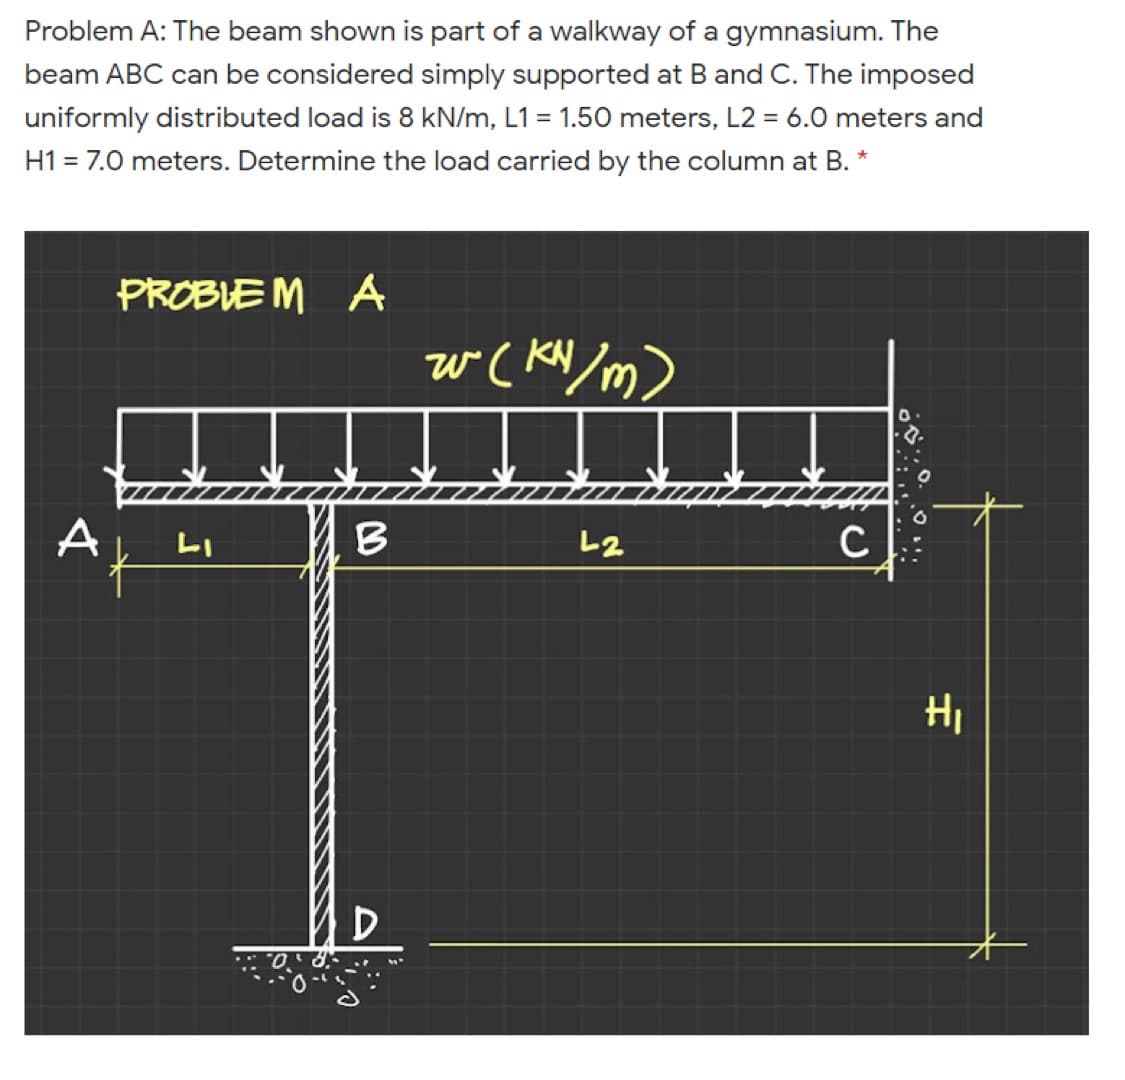 Problem A: The beam shown is part of a walkway of a gymnasium. The
beam ABC can be considered simply supported at B and C. The imposed
uniformly distributed load is 8 kN/m, L1 = 1.50 meters, L2 = 6.0 meters and
H1 = 7.0 meters. Determine the load carried by the column at B. *
PROBLE M A
w ( KN/m)
A
LI
B.
L2
HI
D
